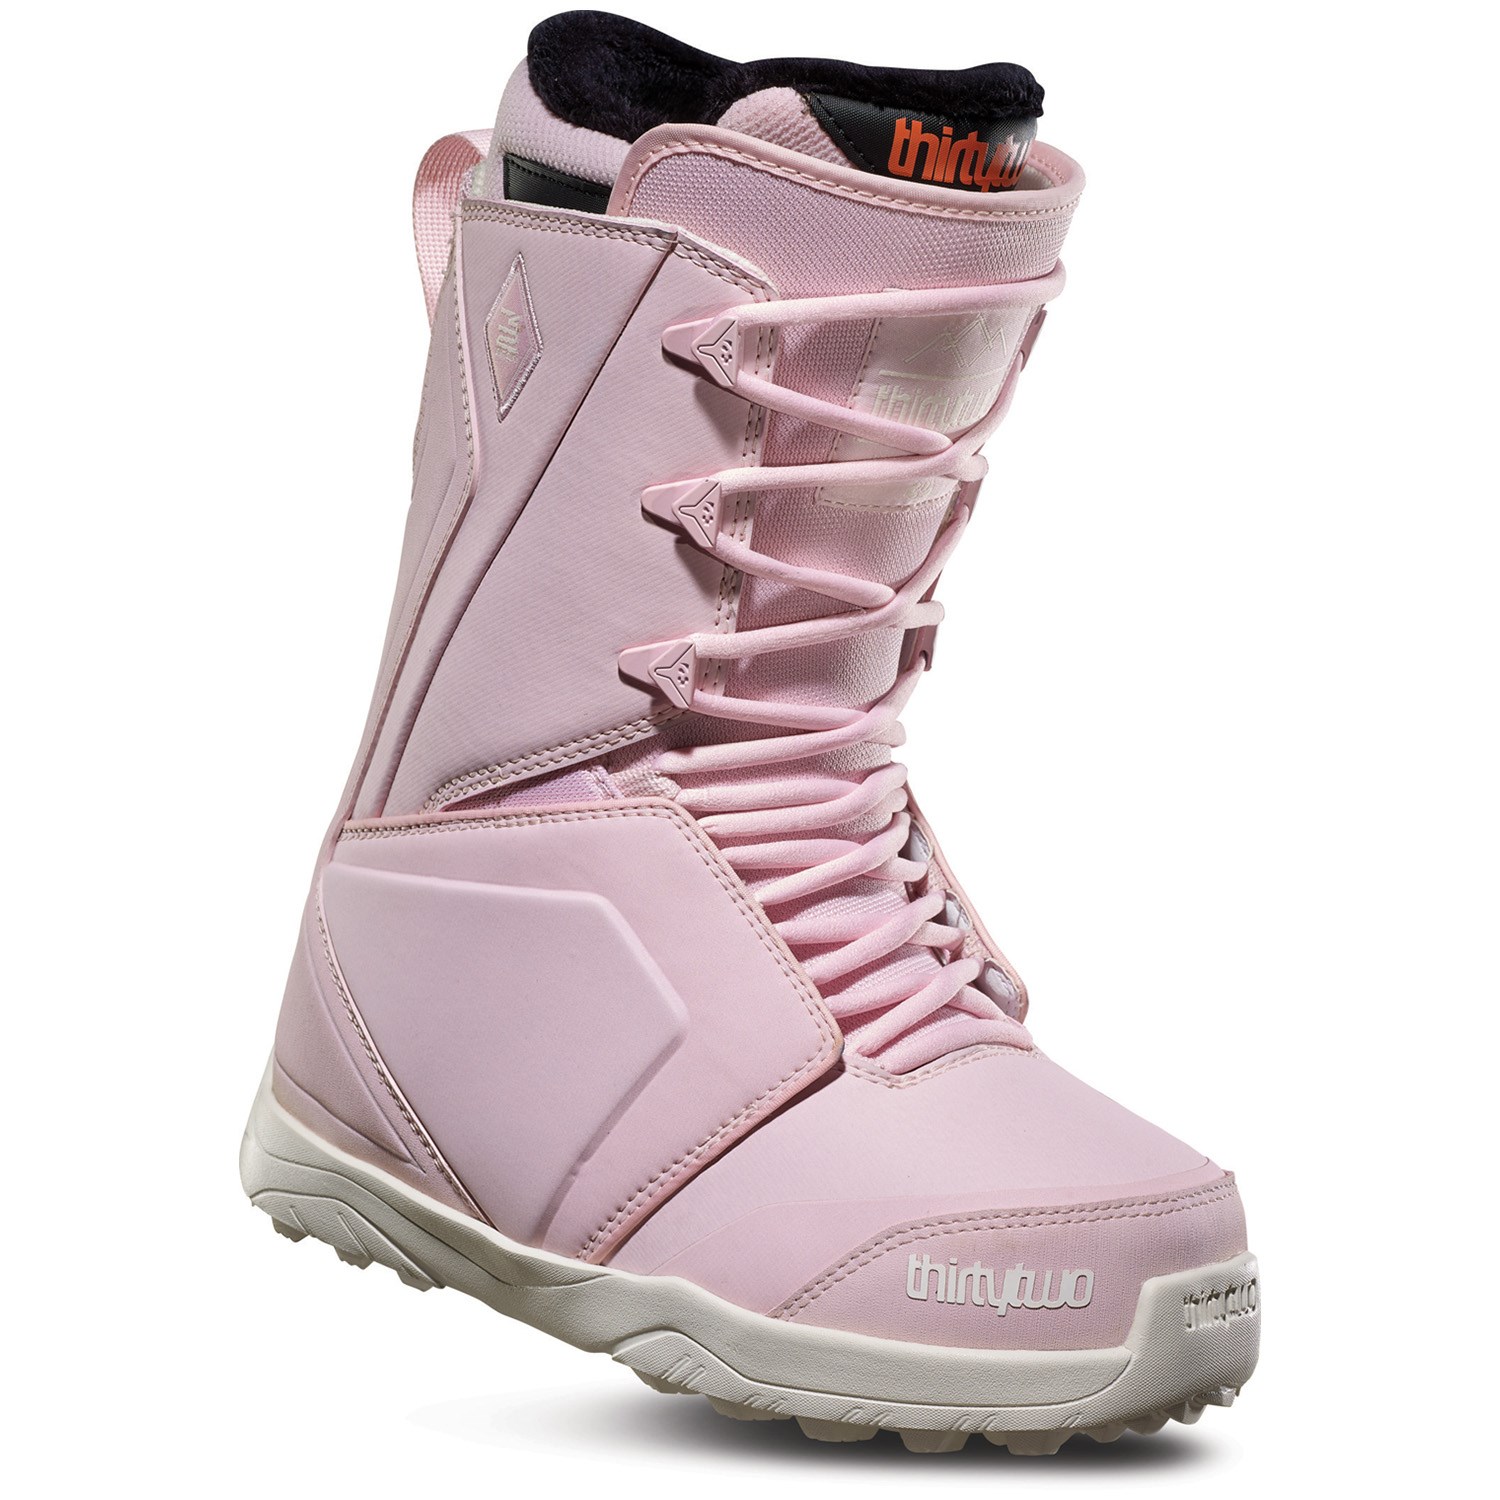 thirtytwo Lashed Snowboard Boots - Women's 2019 | evo